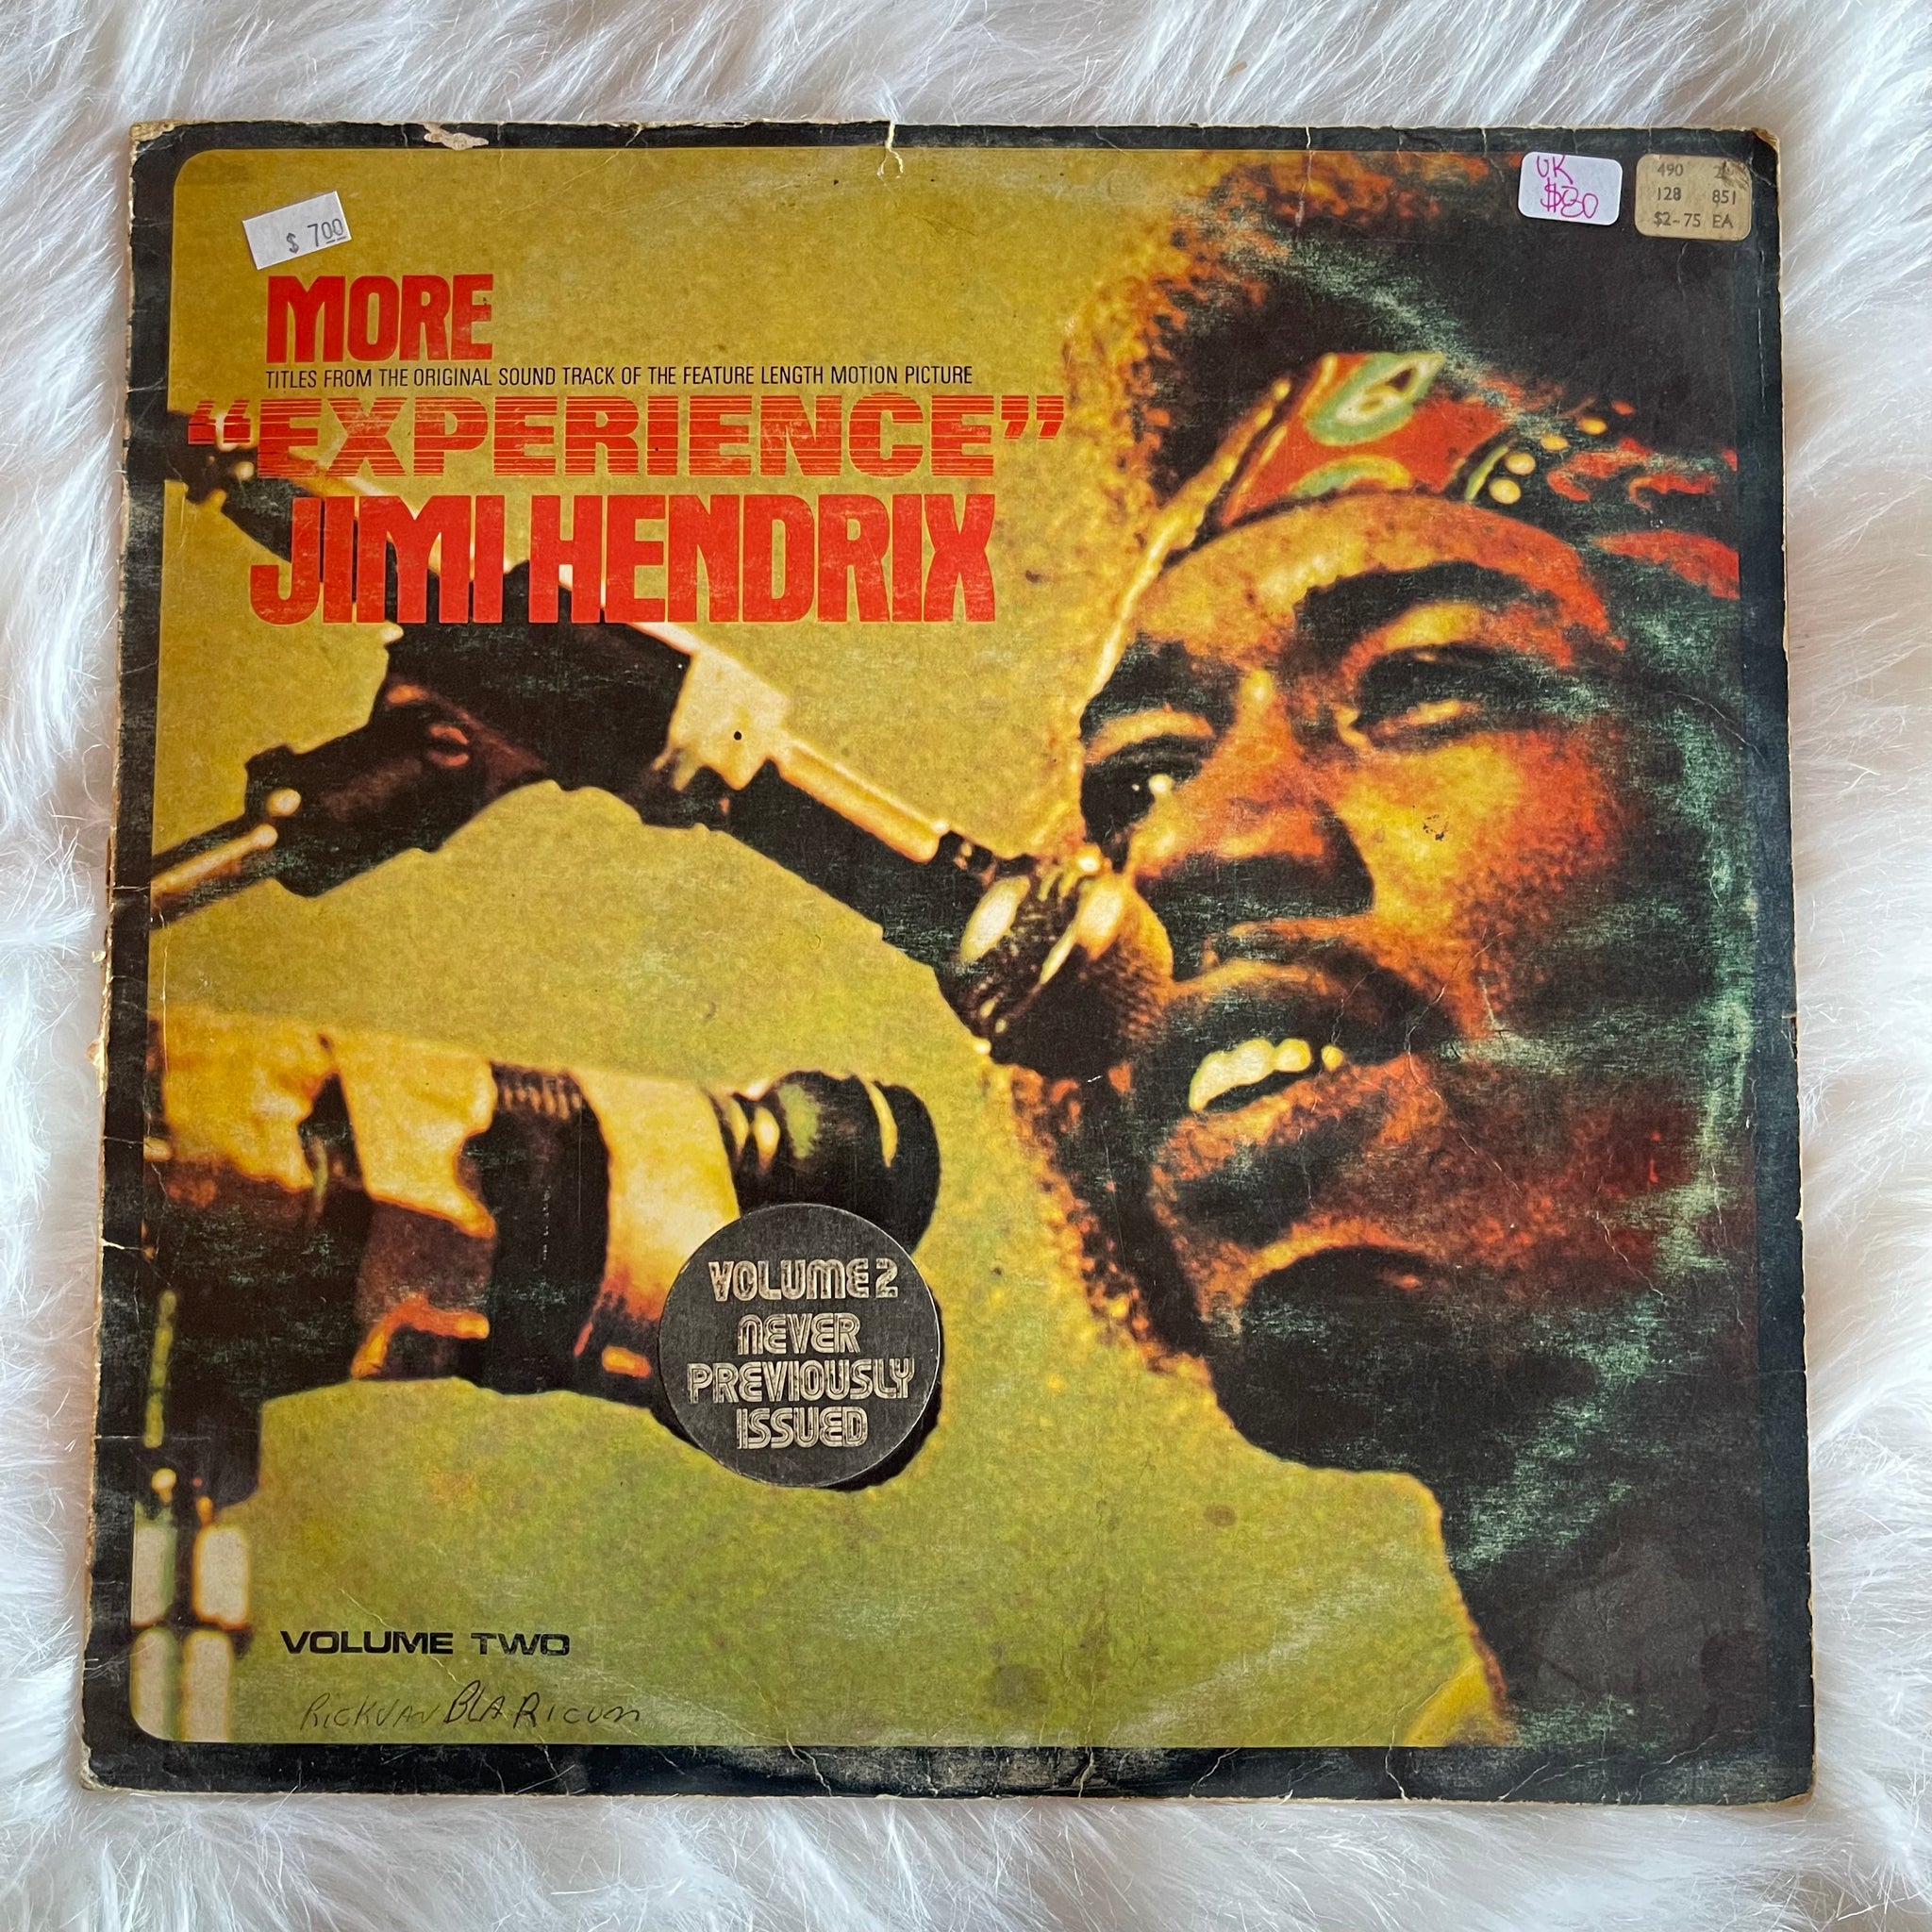 Jimi Hendrix-More Experience/Titles From the Original of the Feature Length Motion Picture VOLUME 2